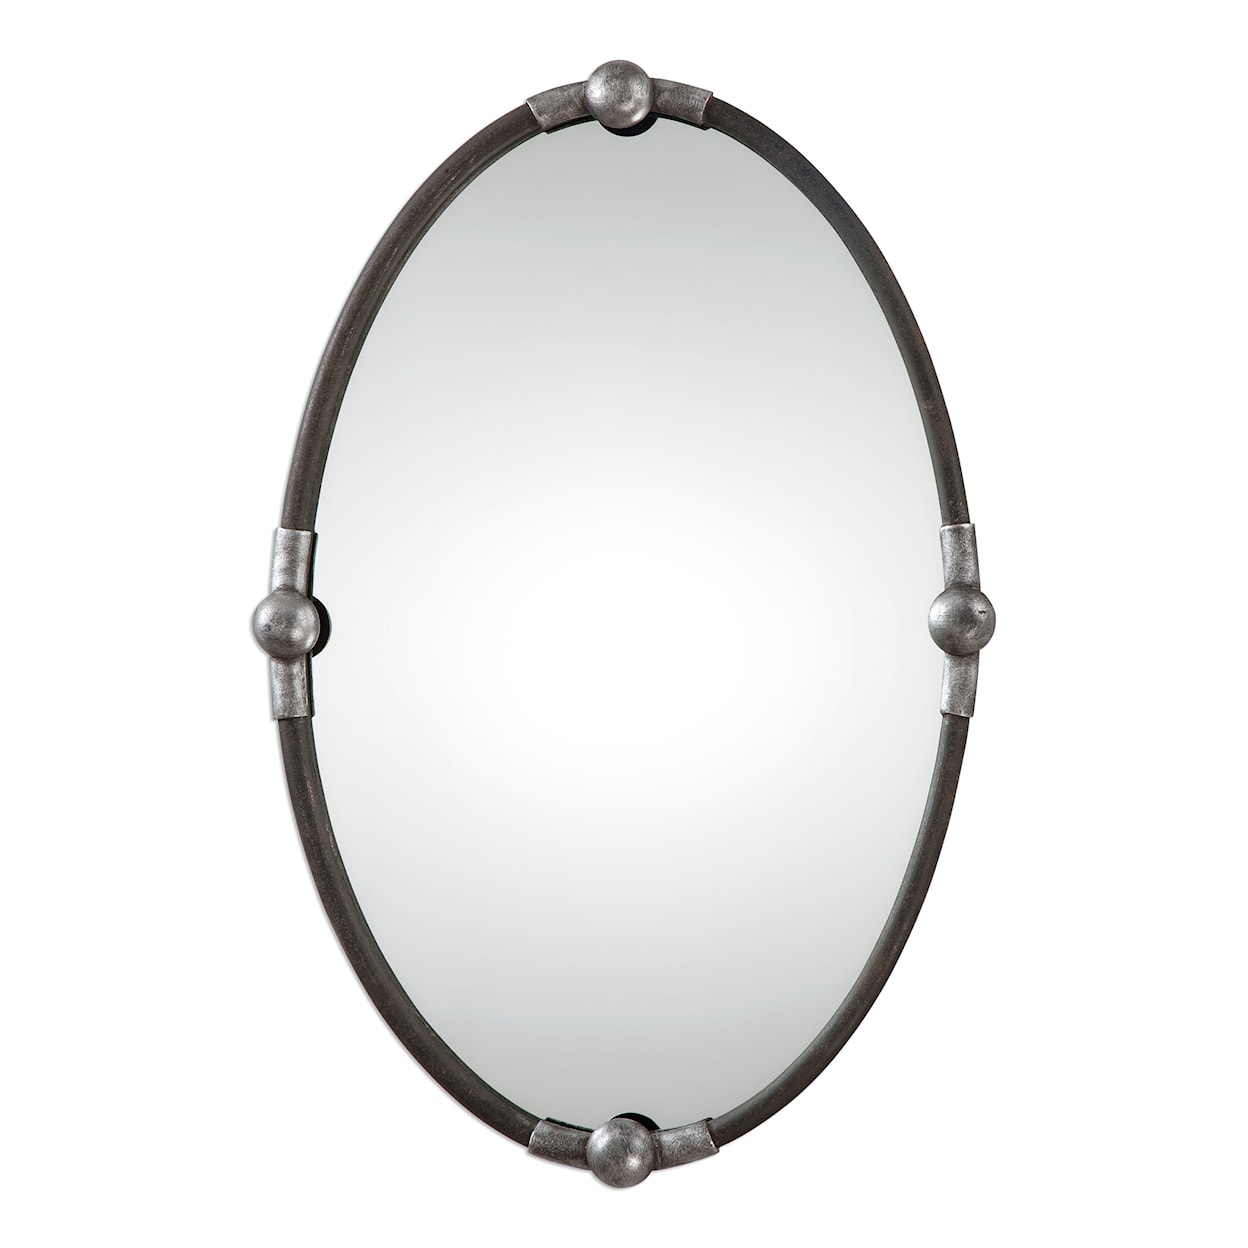 Uttermost Mirrors - Oval Carrick Black Oval Mirror